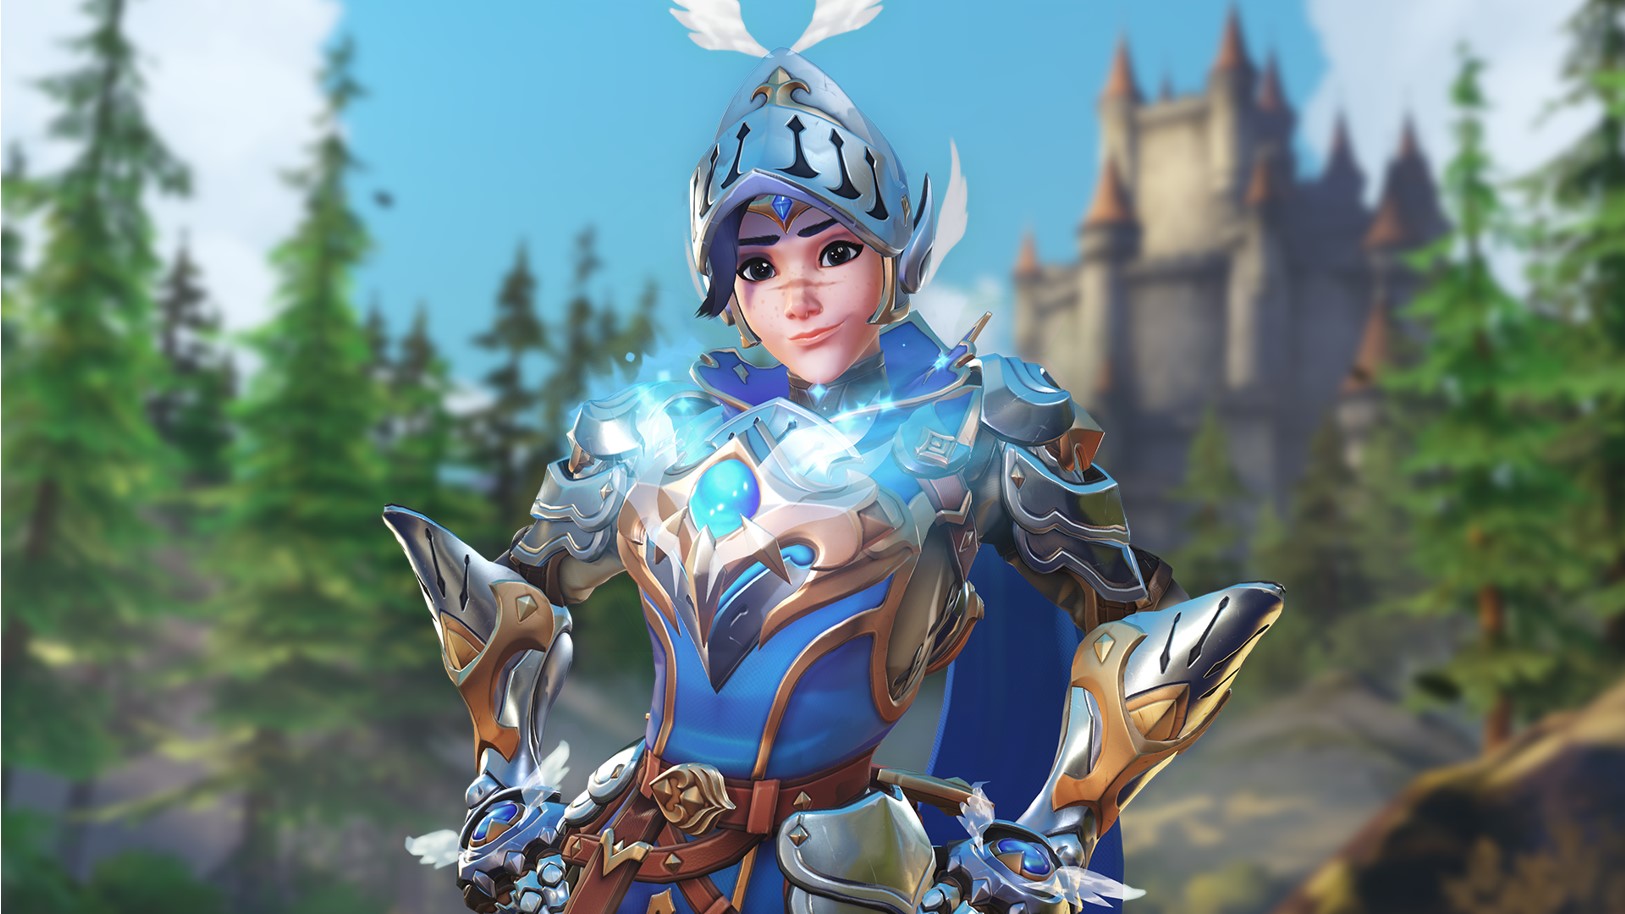 Overwatch 2 character Tracer wearing medieval knight armor.